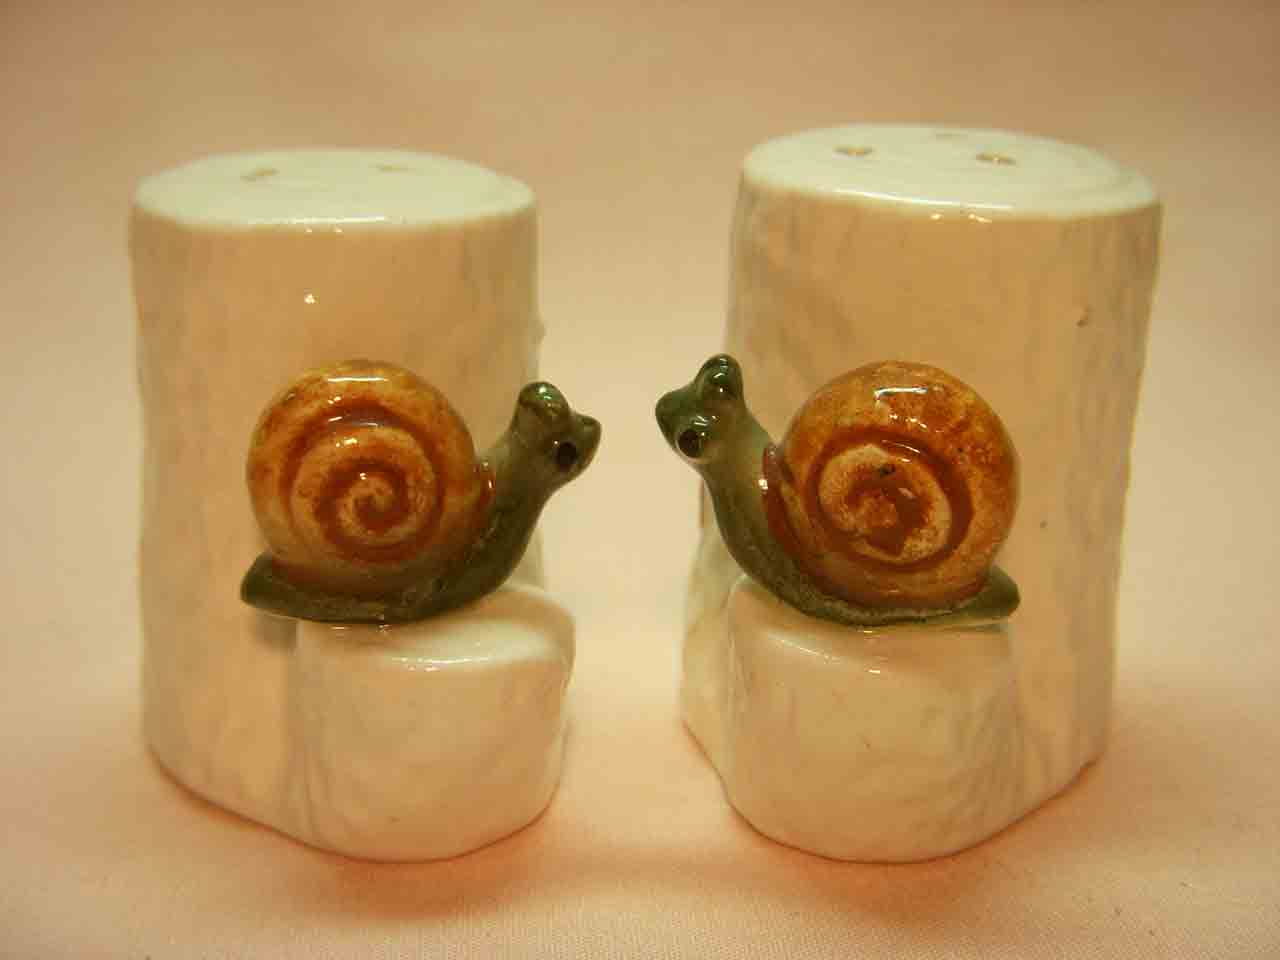 Bone China animals by white tree stumps salt and pepper shakers - snails